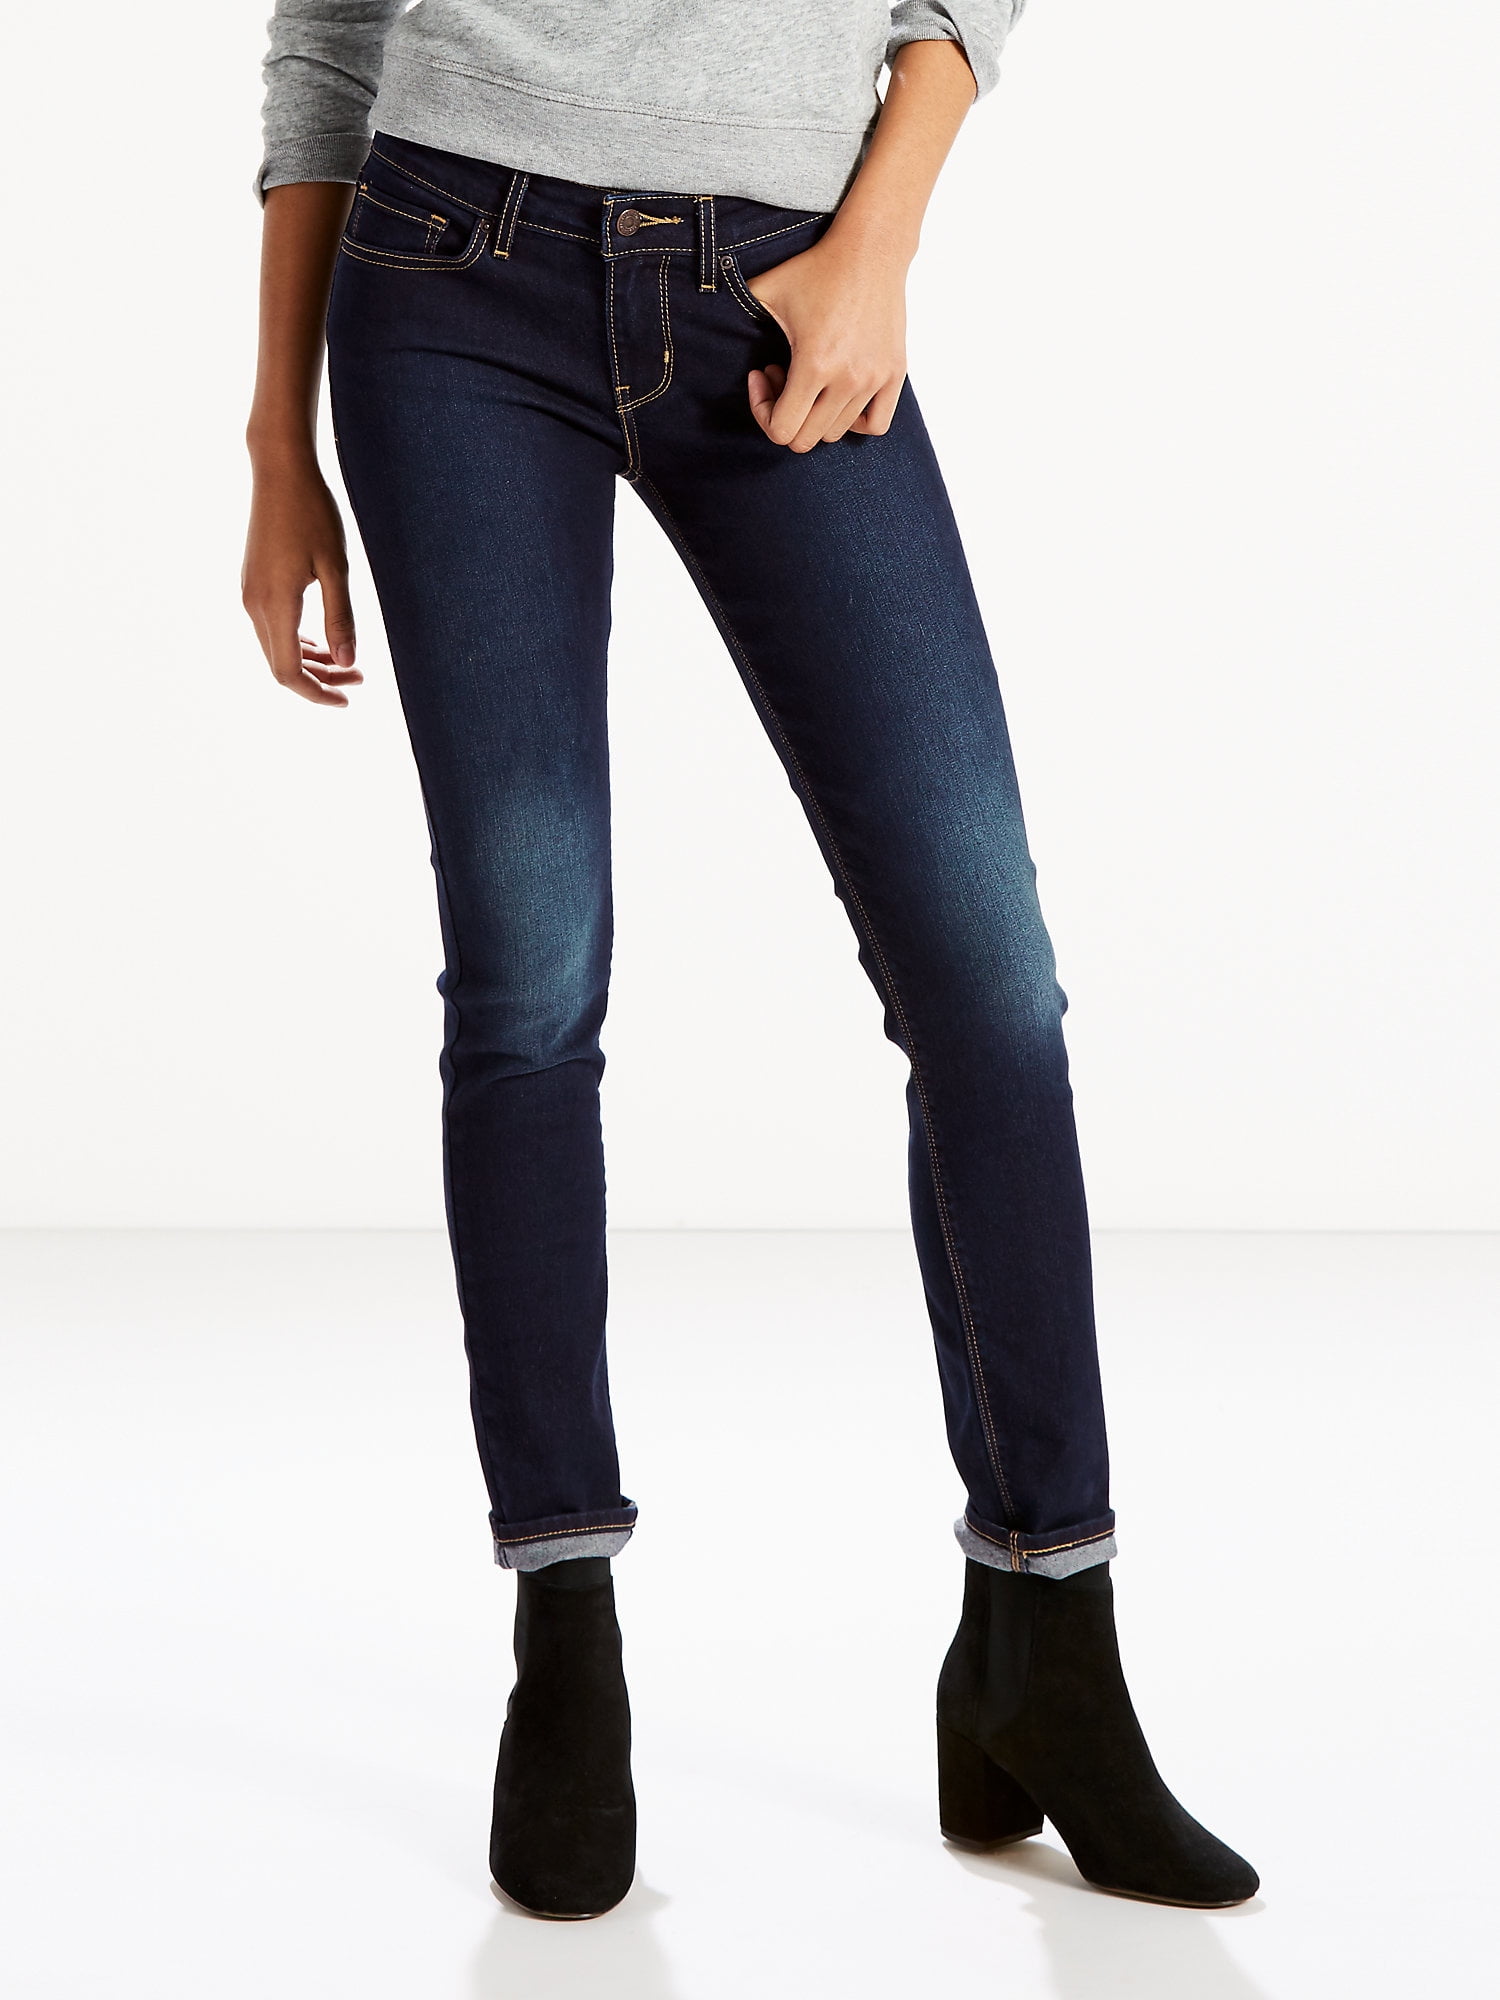 Levi’s Skinny Jeans 711 Skinny Ankle Jeans RRP £85 